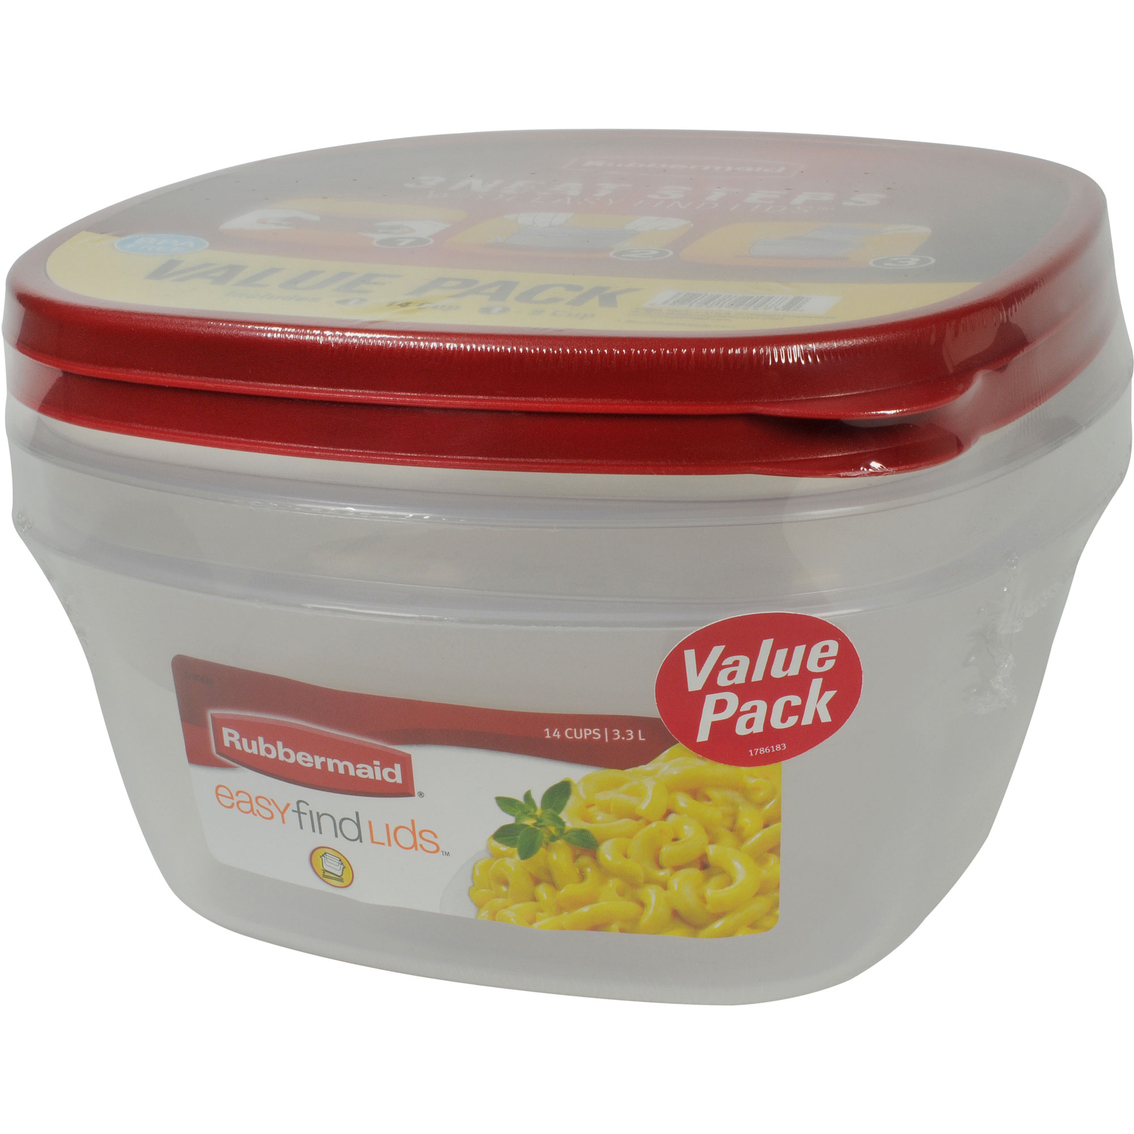 Rubbermaid 9 Cup And 14 Cup Storage Container Value Pack With Easy Find Lids, Food Storage, Household